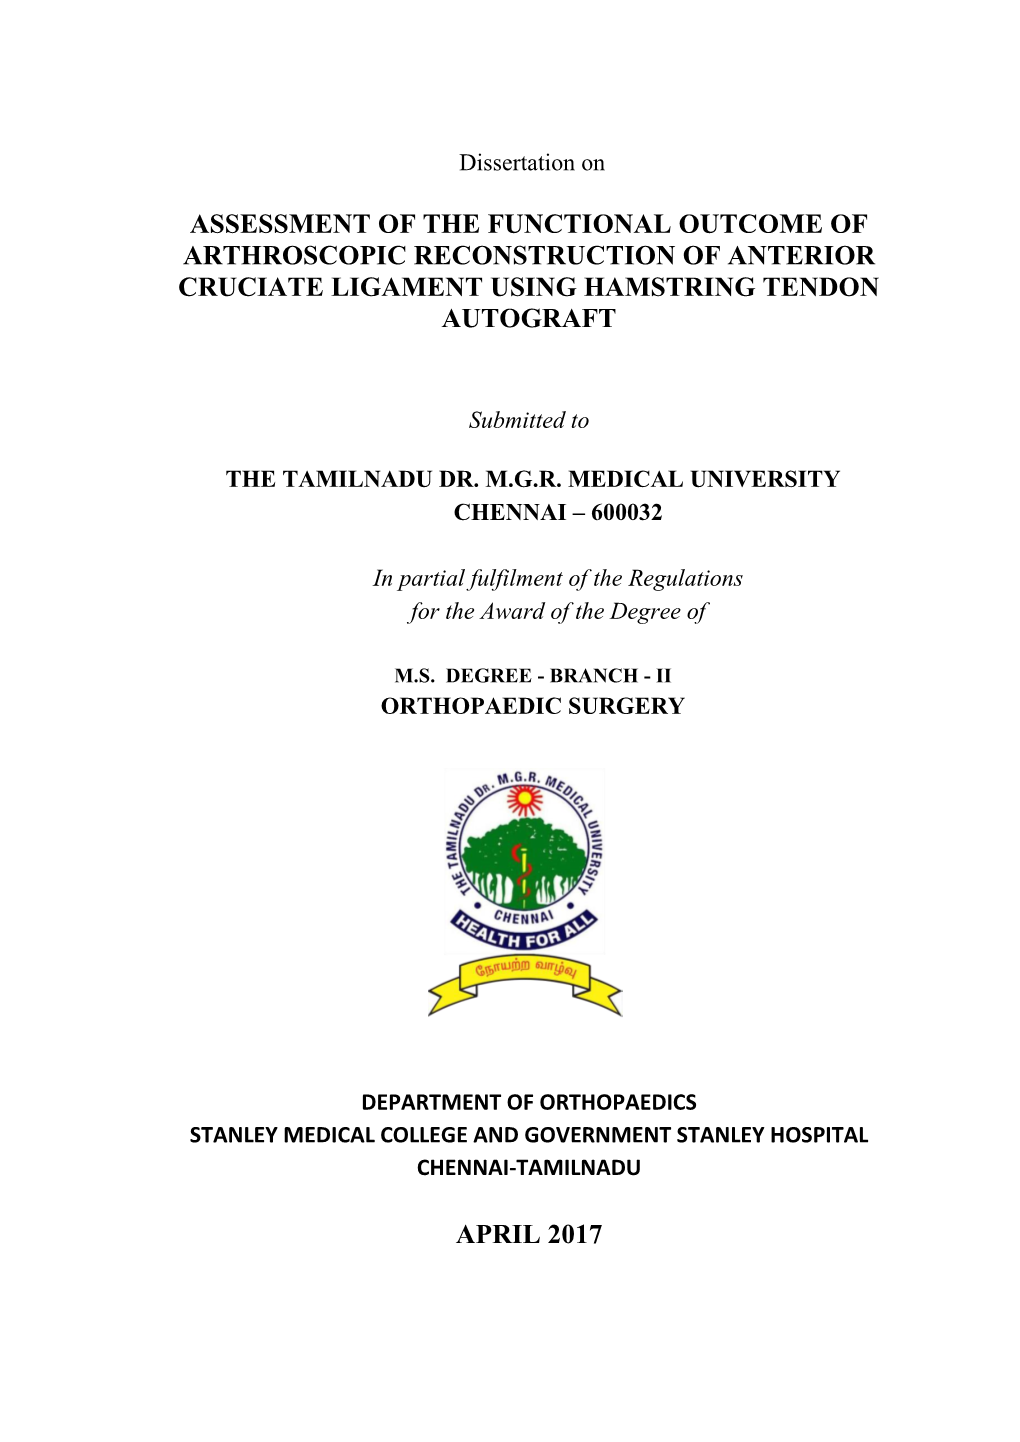 Assessment of the Functional Outcome of Arthroscopic Reconstruction of Anterior Cruciate Ligament Using Hamstring Tendon Autograft